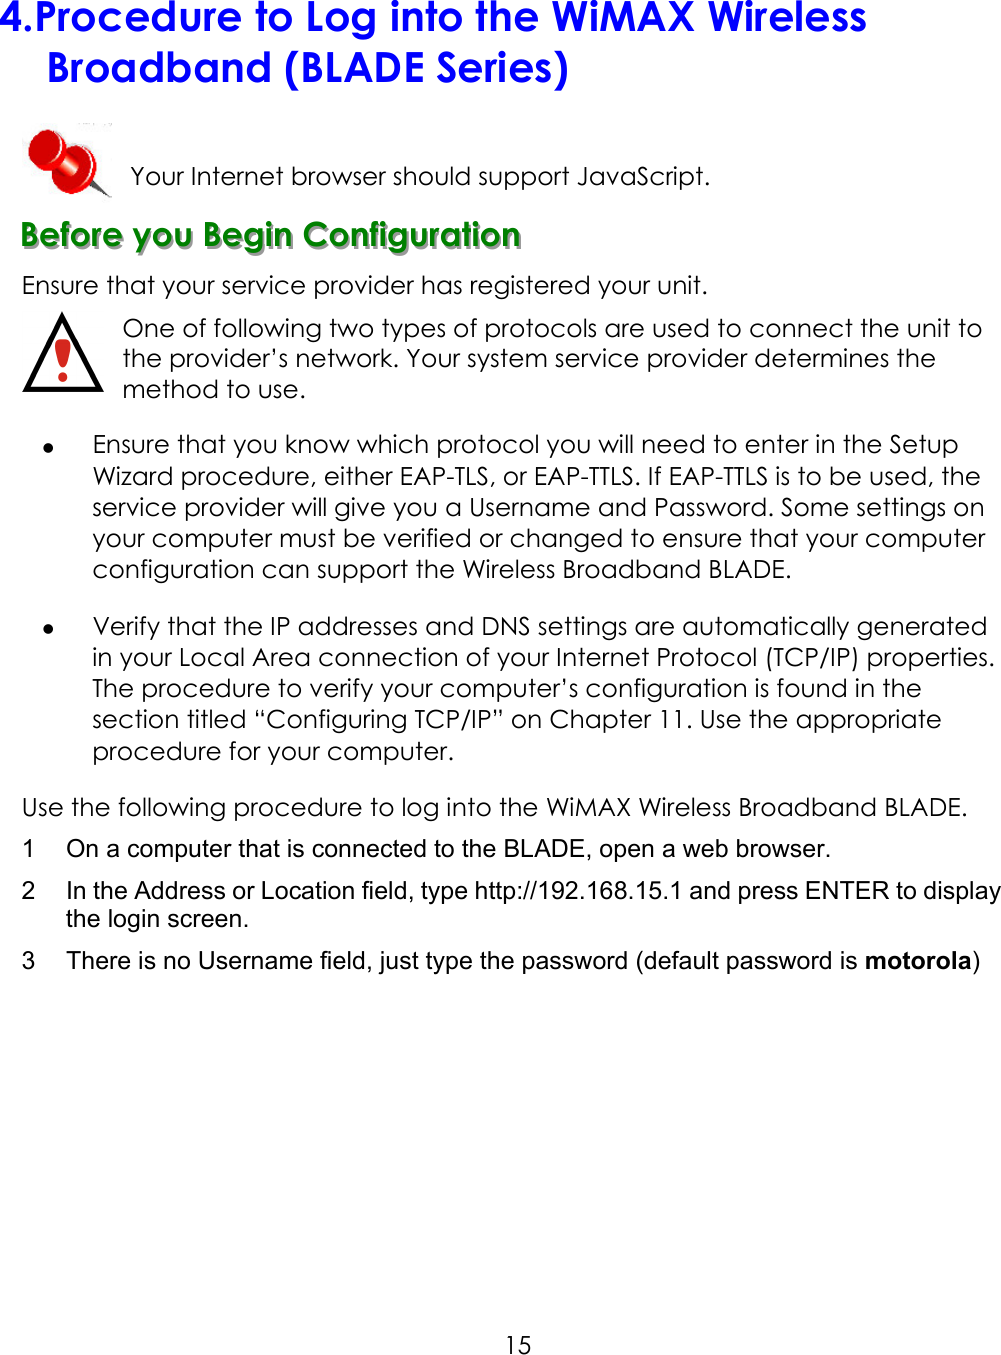     154. Procedure to Log into the WiMAX Wireless Broadband (BLADE Series)  Your Internet browser should support JavaScript. BBBeeefffooorrreee   yyyooouuu   BBBeeegggiiinnn   CCCooonnnfffiiiggguuurrraaatttiiiooonnn   Ensure that your service provider has registered your unit. One of following two types of protocols are used to connect the unit to             the provider’s network. Your system service provider determines the   method to use.   Ensure that you know which protocol you will need to enter in the Setup Wizard procedure, either EAP-TLS, or EAP-TTLS. If EAP-TTLS is to be used, the service provider will give you a Username and Password. Some settings on your computer must be verified or changed to ensure that your computer configuration can support the Wireless Broadband BLADE.   Verify that the IP addresses and DNS settings are automatically generated in your Local Area connection of your Internet Protocol (TCP/IP) properties. The procedure to verify your computer’s configuration is found in the section titled “Configuring TCP/IP” on Chapter 11. Use the appropriate procedure for your computer. Use the following procedure to log into the WiMAX Wireless Broadband BLADE. 1  On a computer that is connected to the BLADE, open a web browser. 2  In the Address or Location field, type http://192.168.15.1 and press ENTER to display the login screen. 3  There is no Username field, just type the password (default password is motorola)    